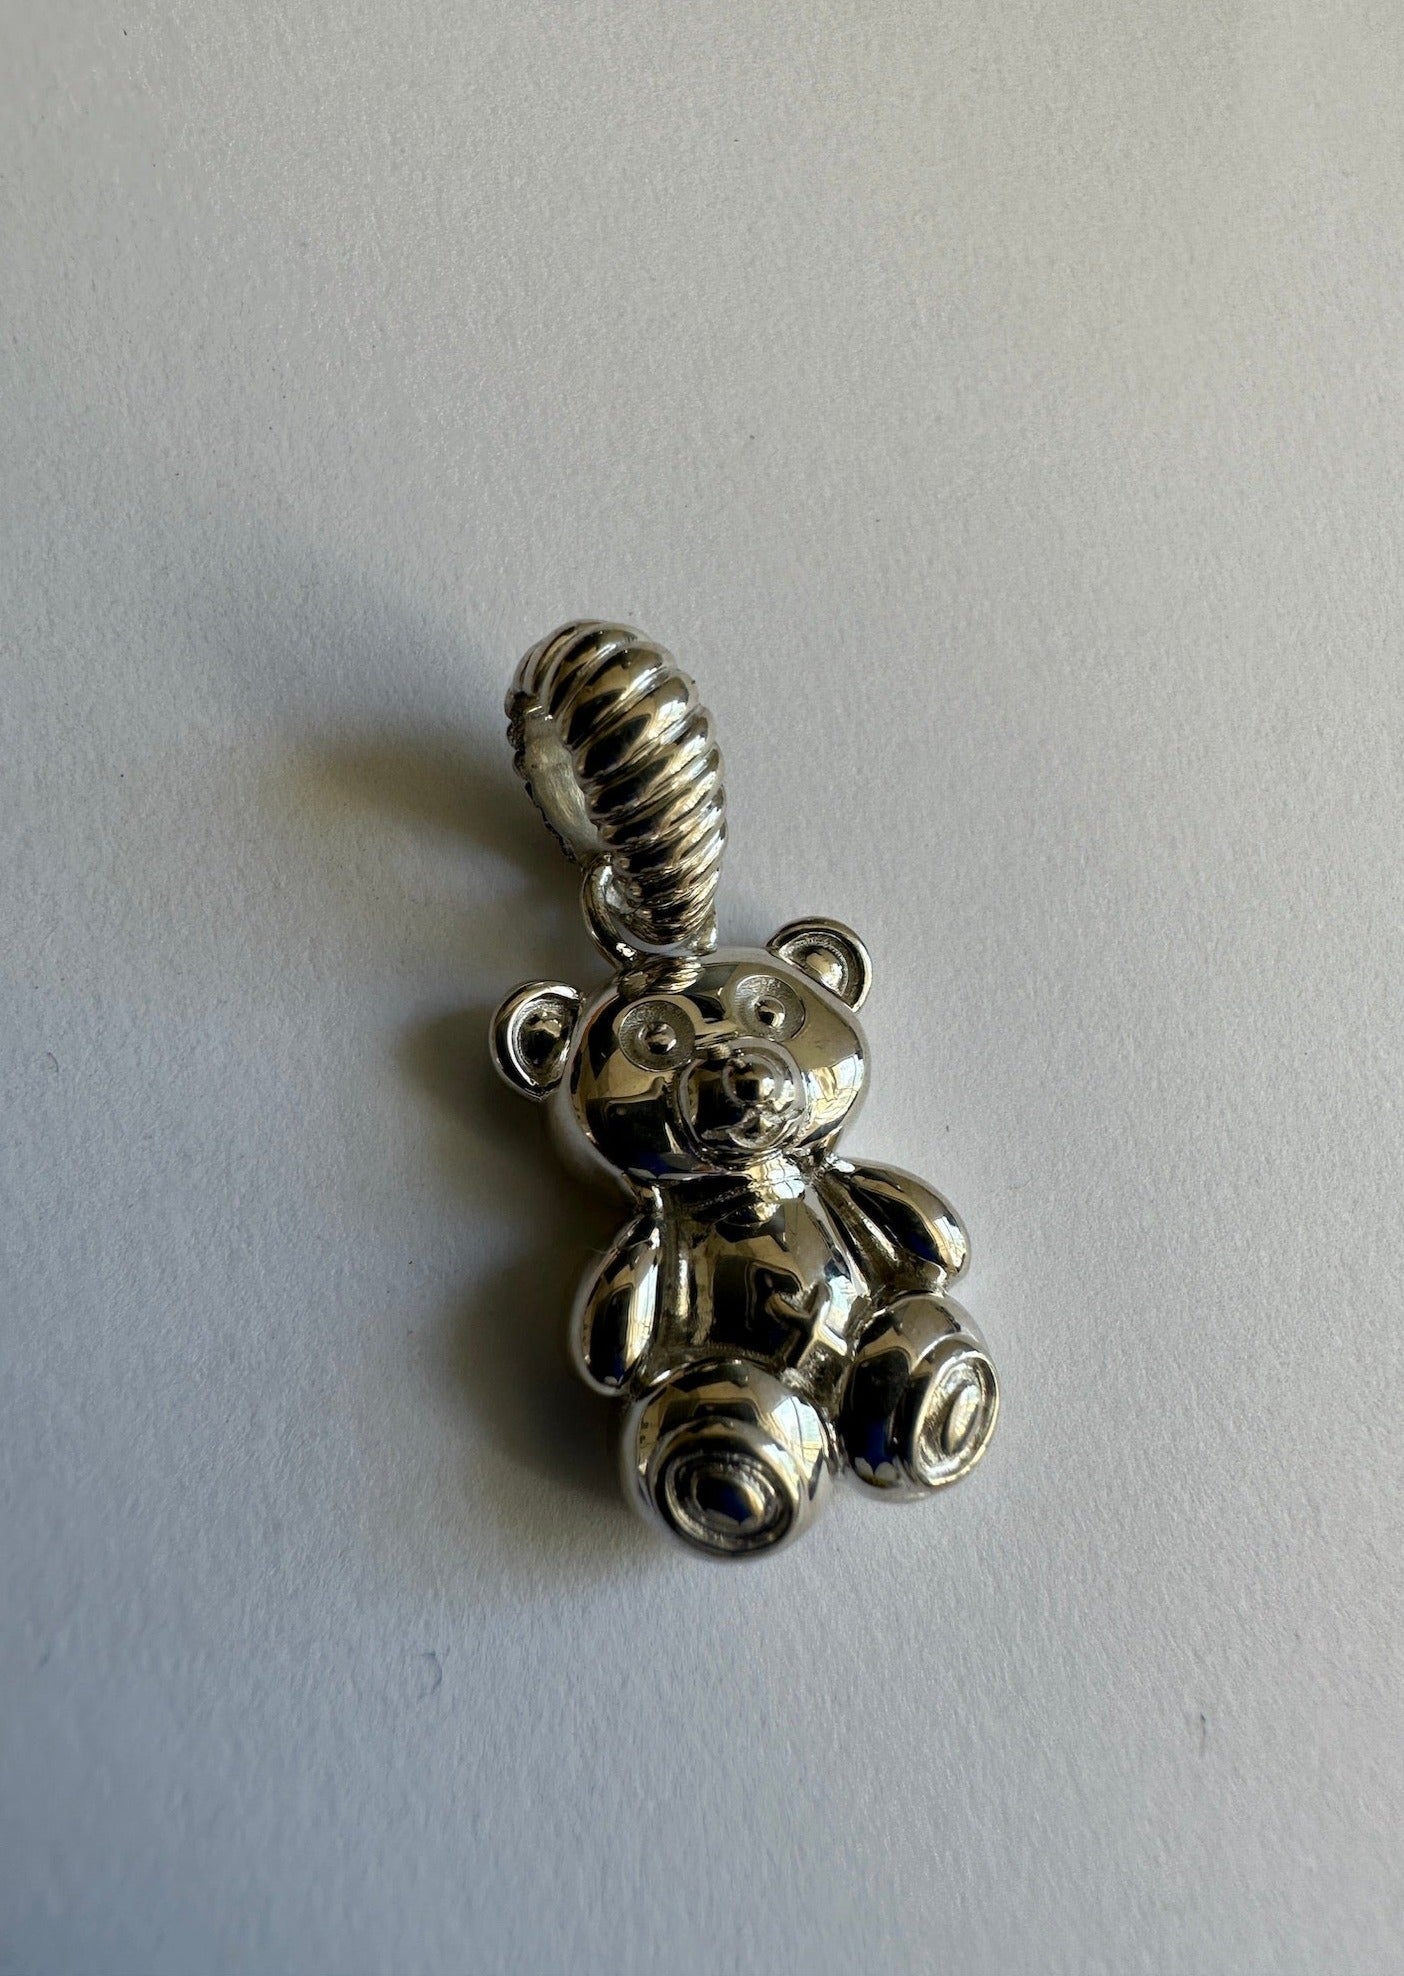 Archive Oliver Teddy Bear Pendant - Silver